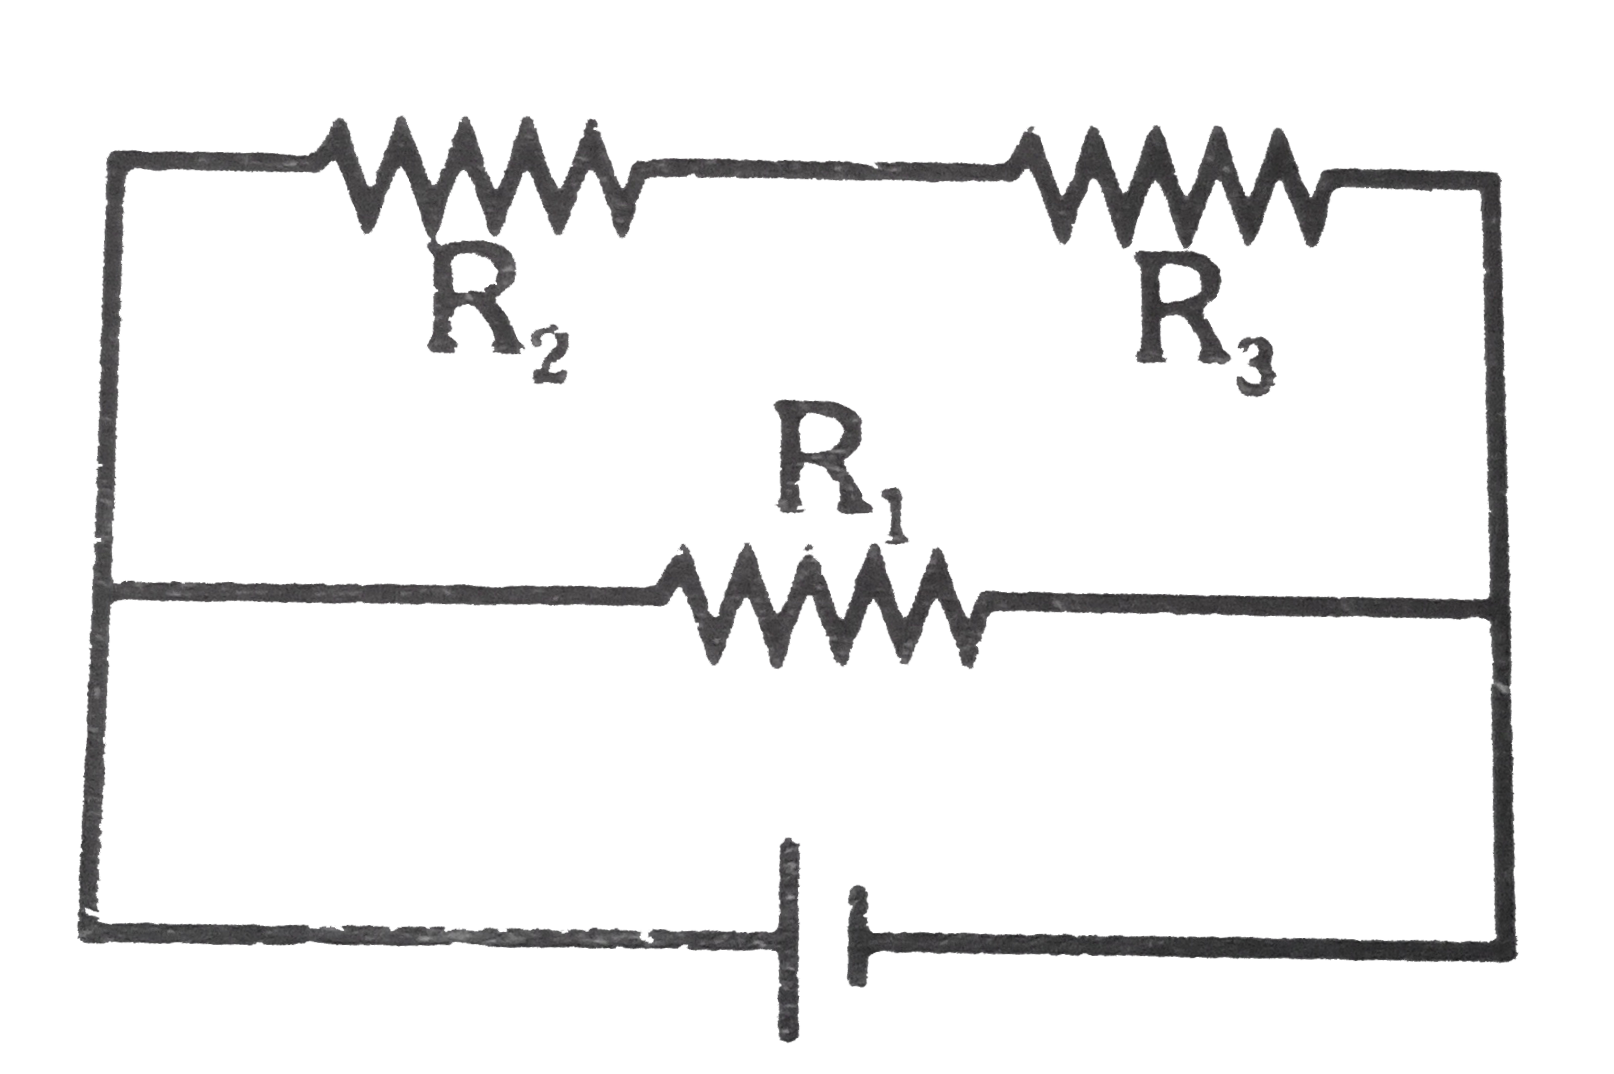 In given circuit R(1)=5Omega,R(2)=3Omega=7Omega and supply voltage is 10V. Calculate power dissipated in R(1) and R(3).